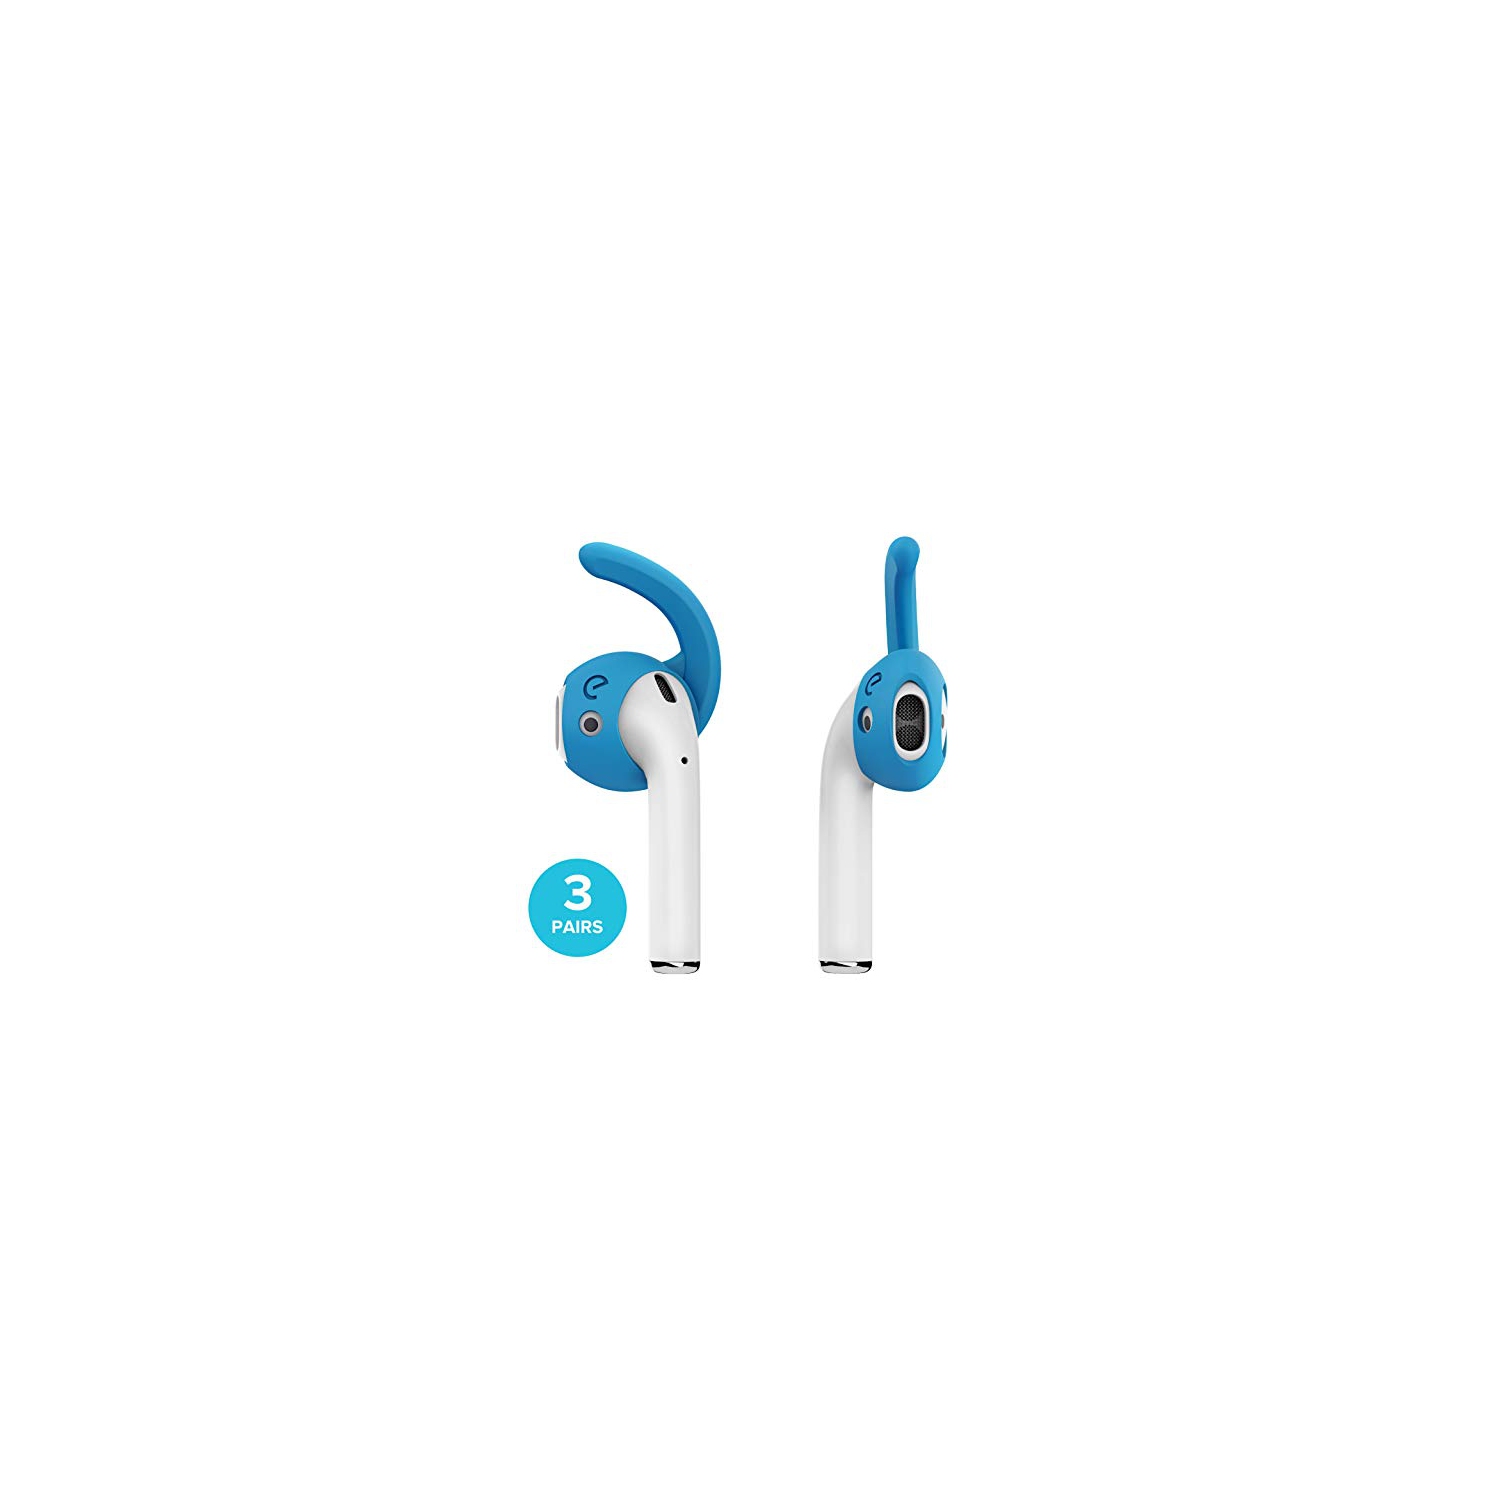 EarBuddyz 2.0 Ear Hooks and Covers Accessories for Apple AirPods or EarPods Headphones/Earphones/Earbuds (3 Pairs) (Sky Blue)